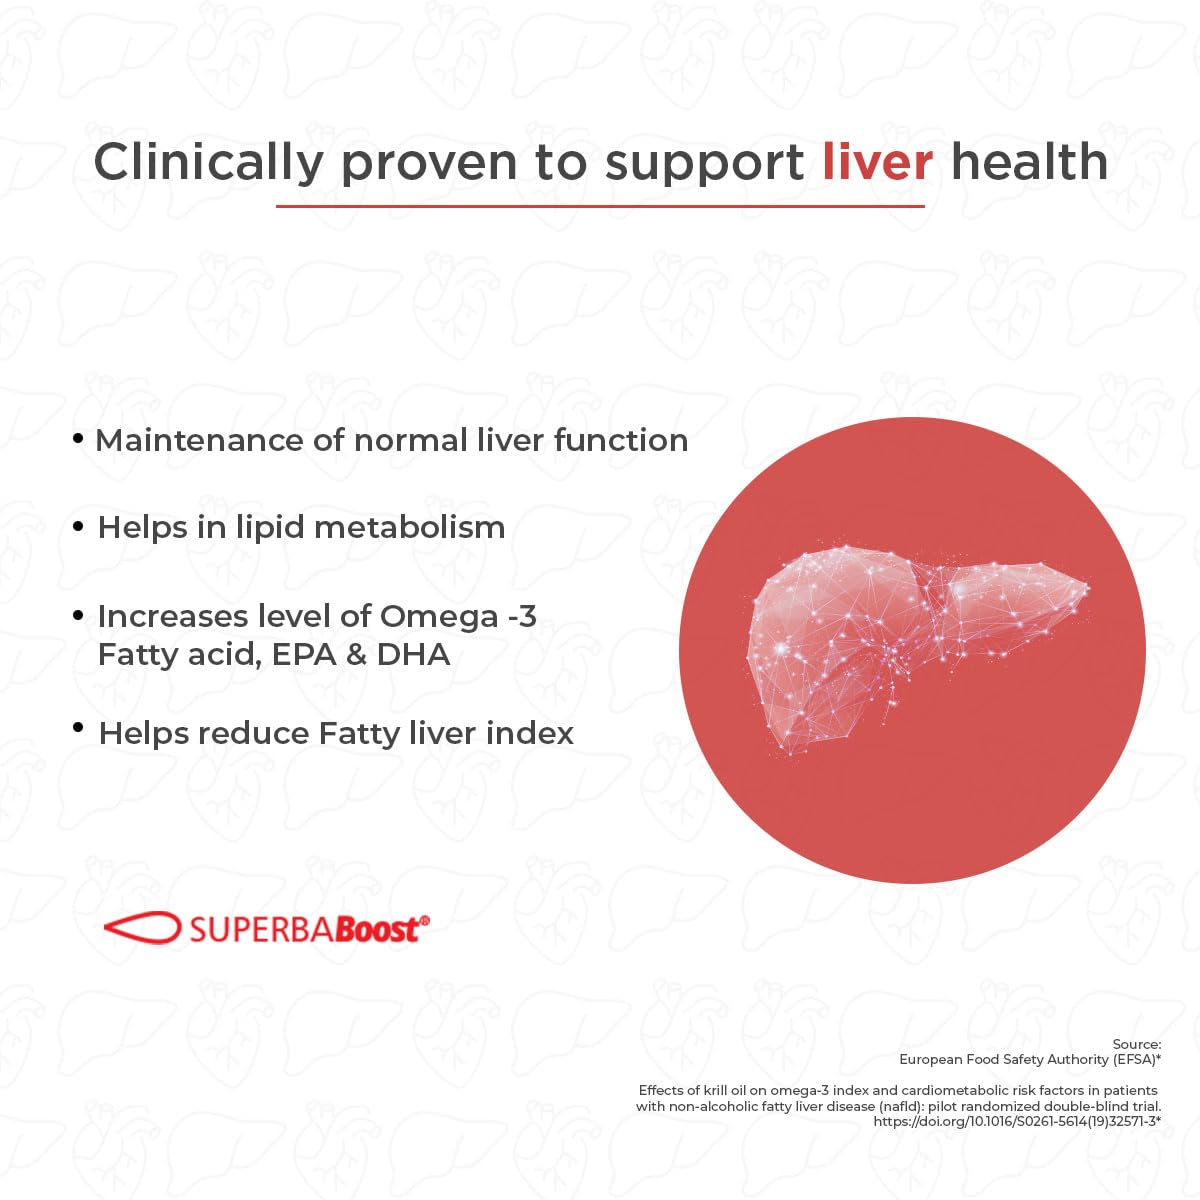 SuperbaBoost clinically proven to support liver health